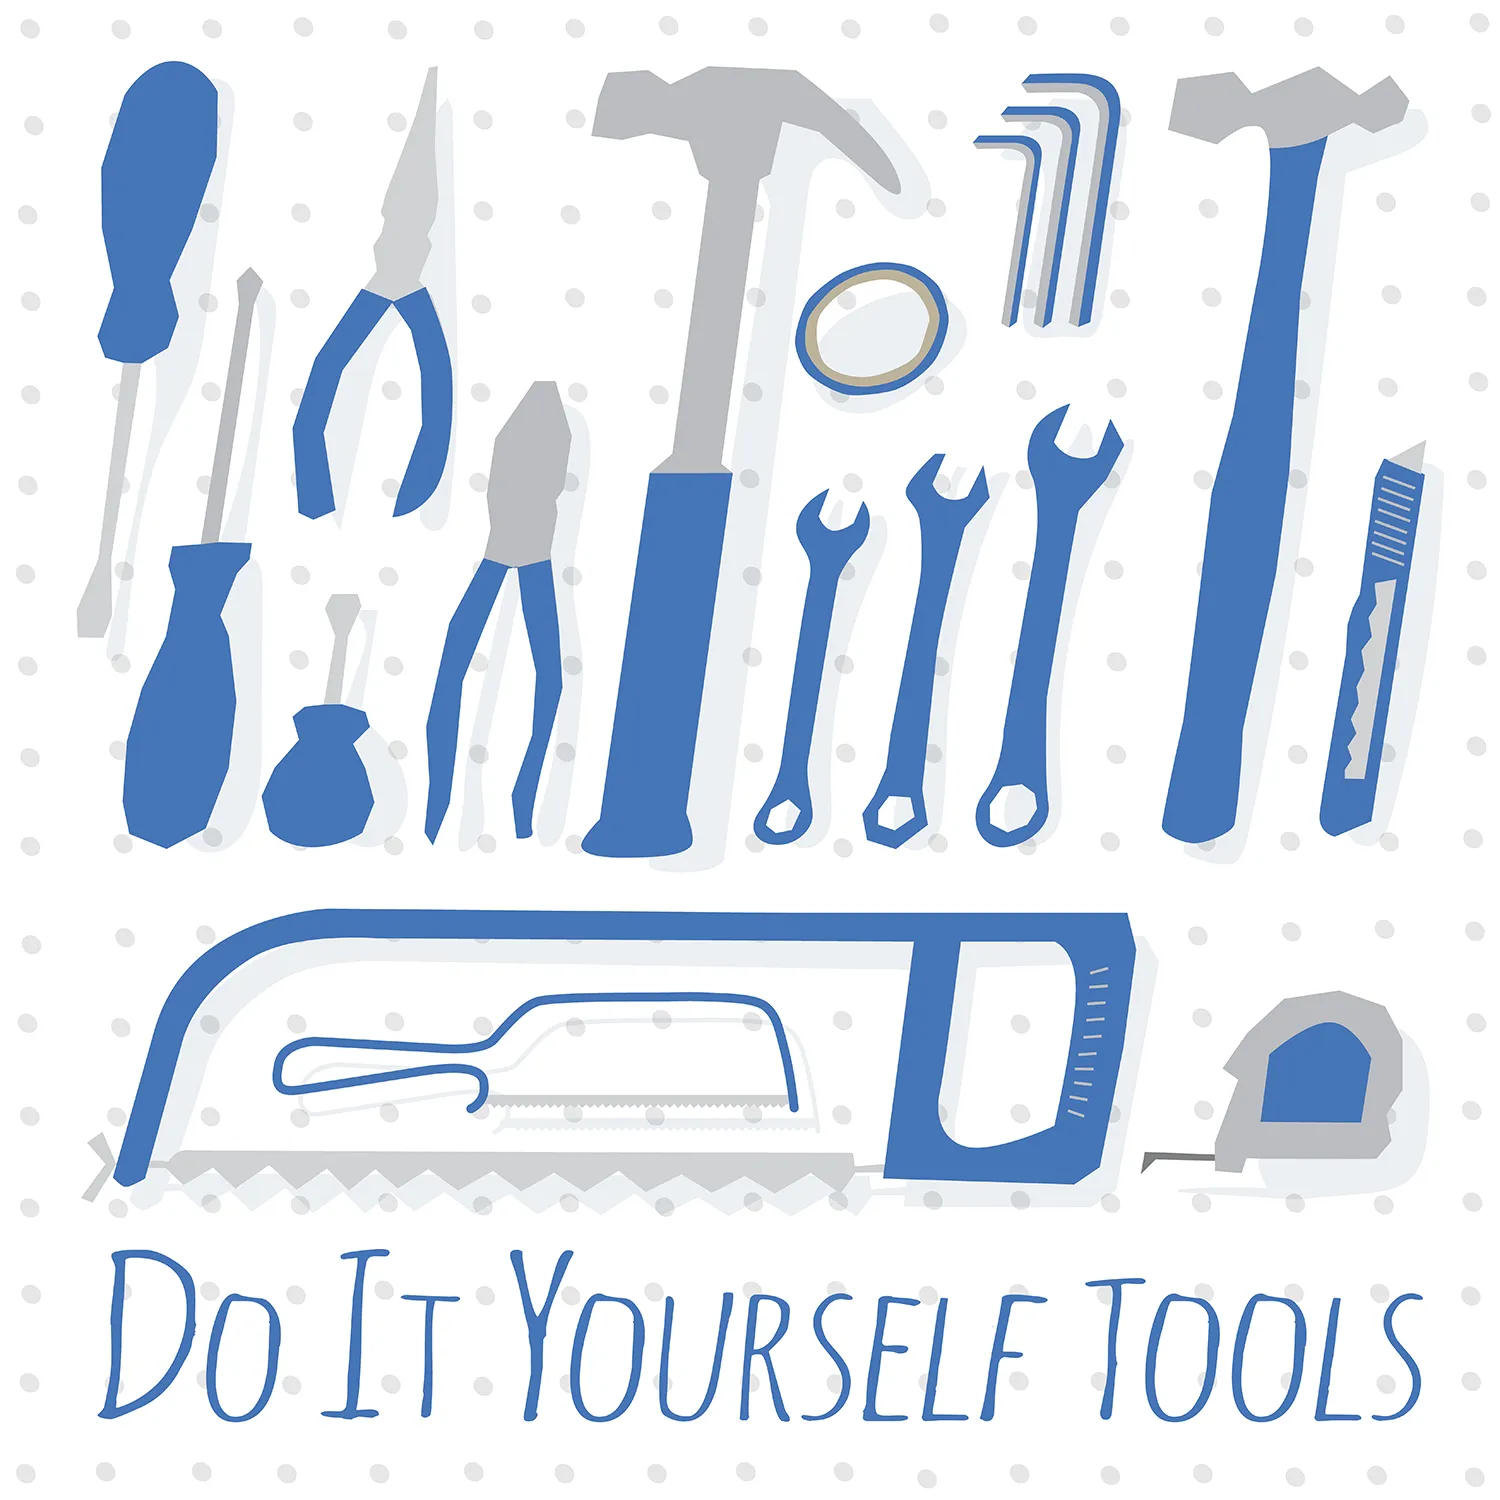 Do It Yourself Tools with shadows, on a pegboard background